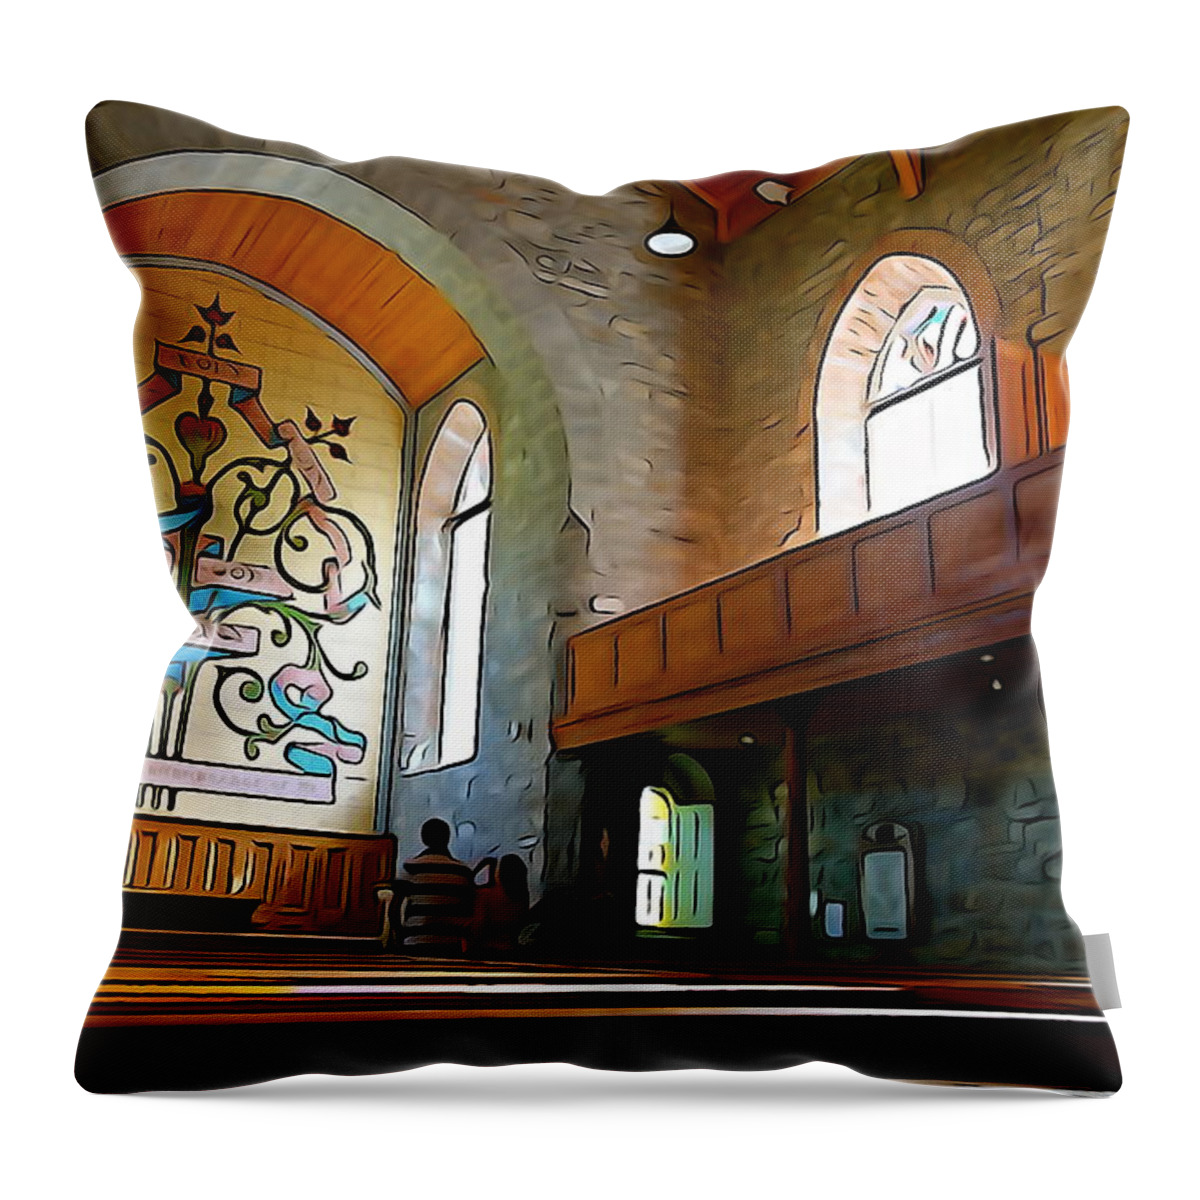 Alter Throw Pillow featuring the photograph Drumcliff Alter by Norma Brock